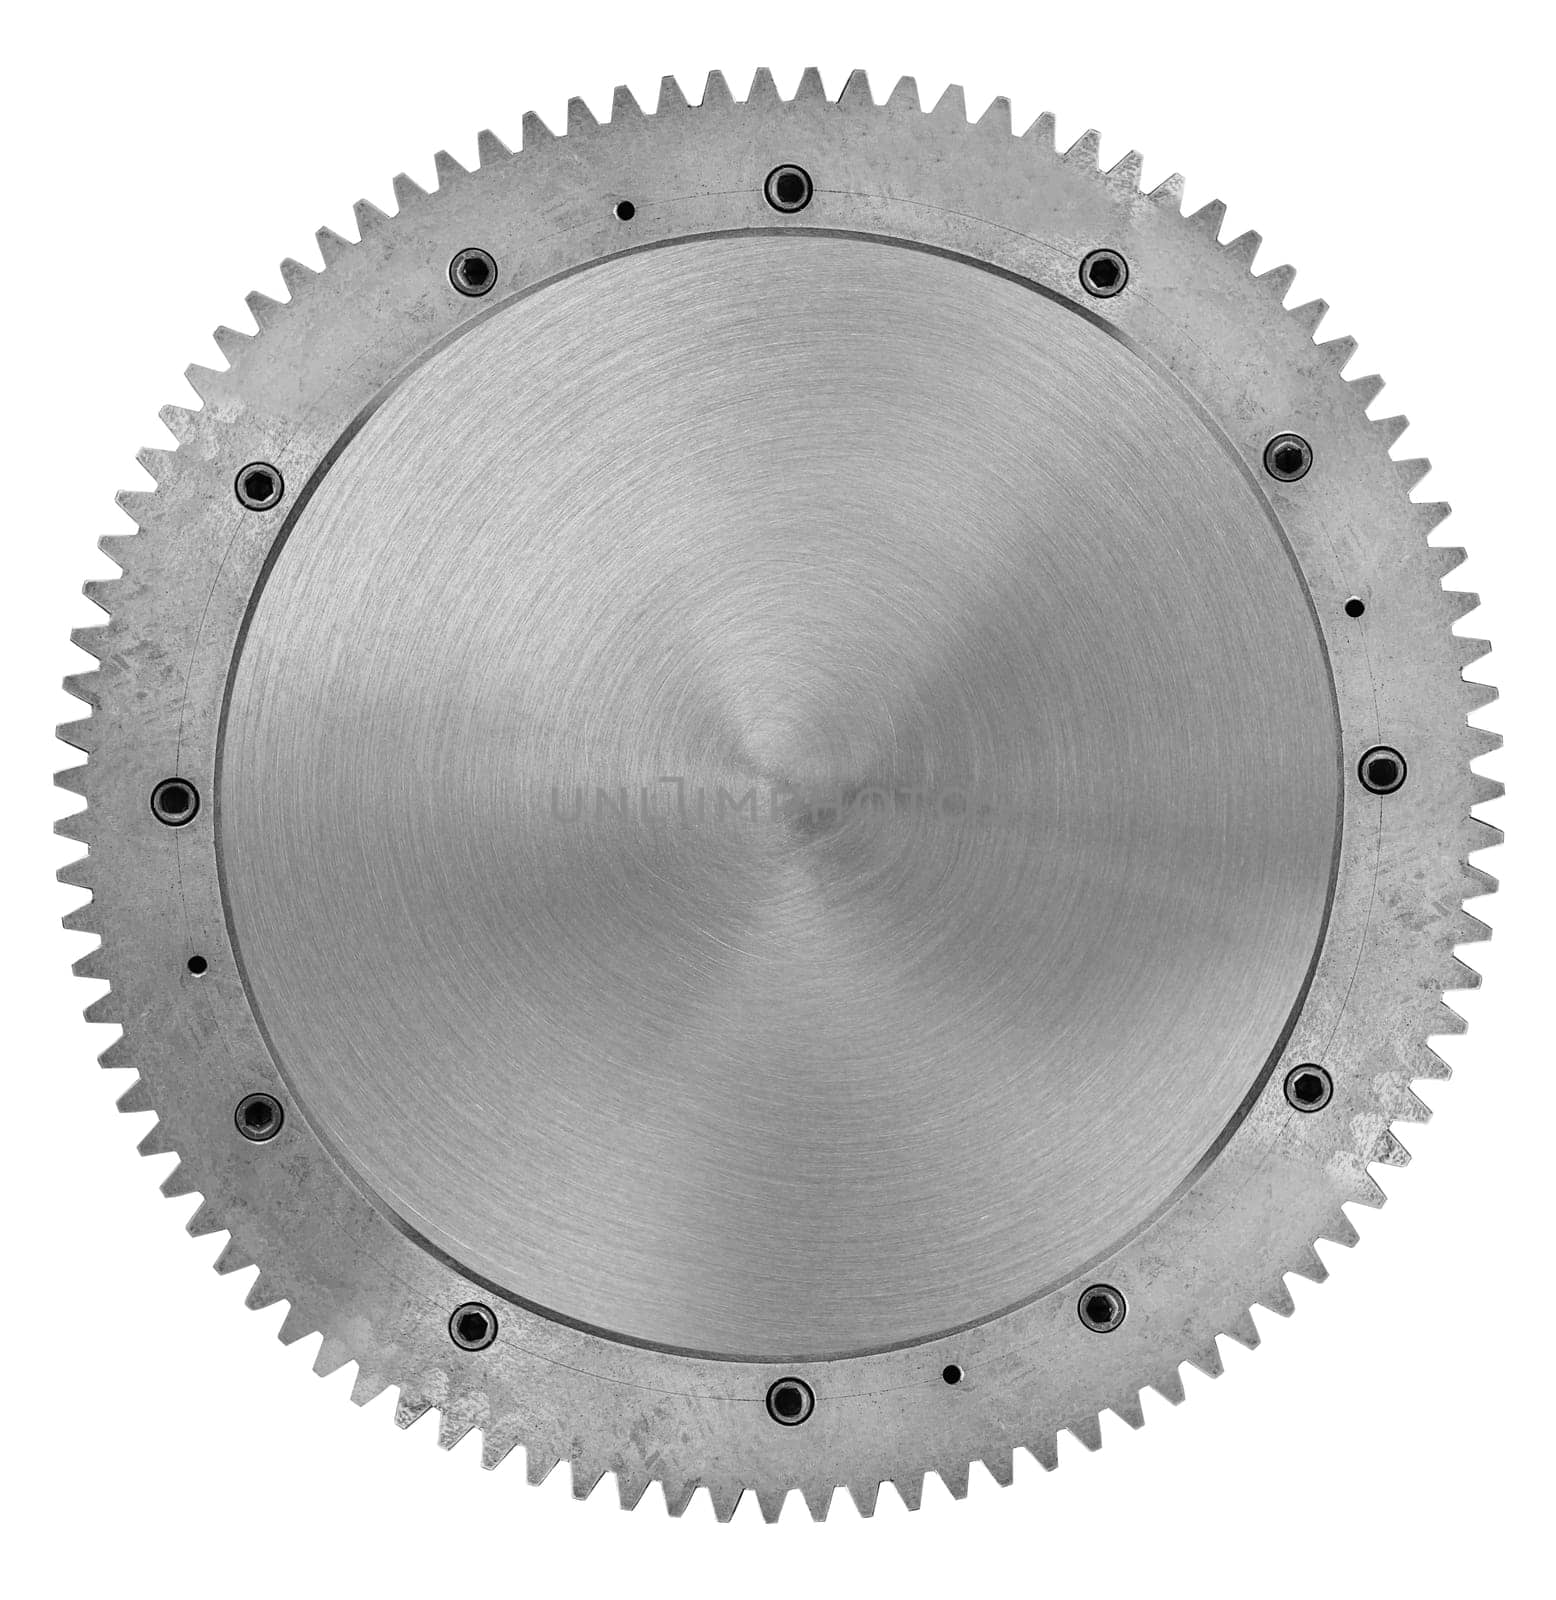 metal toothed gear, on white background in insulation by A_A